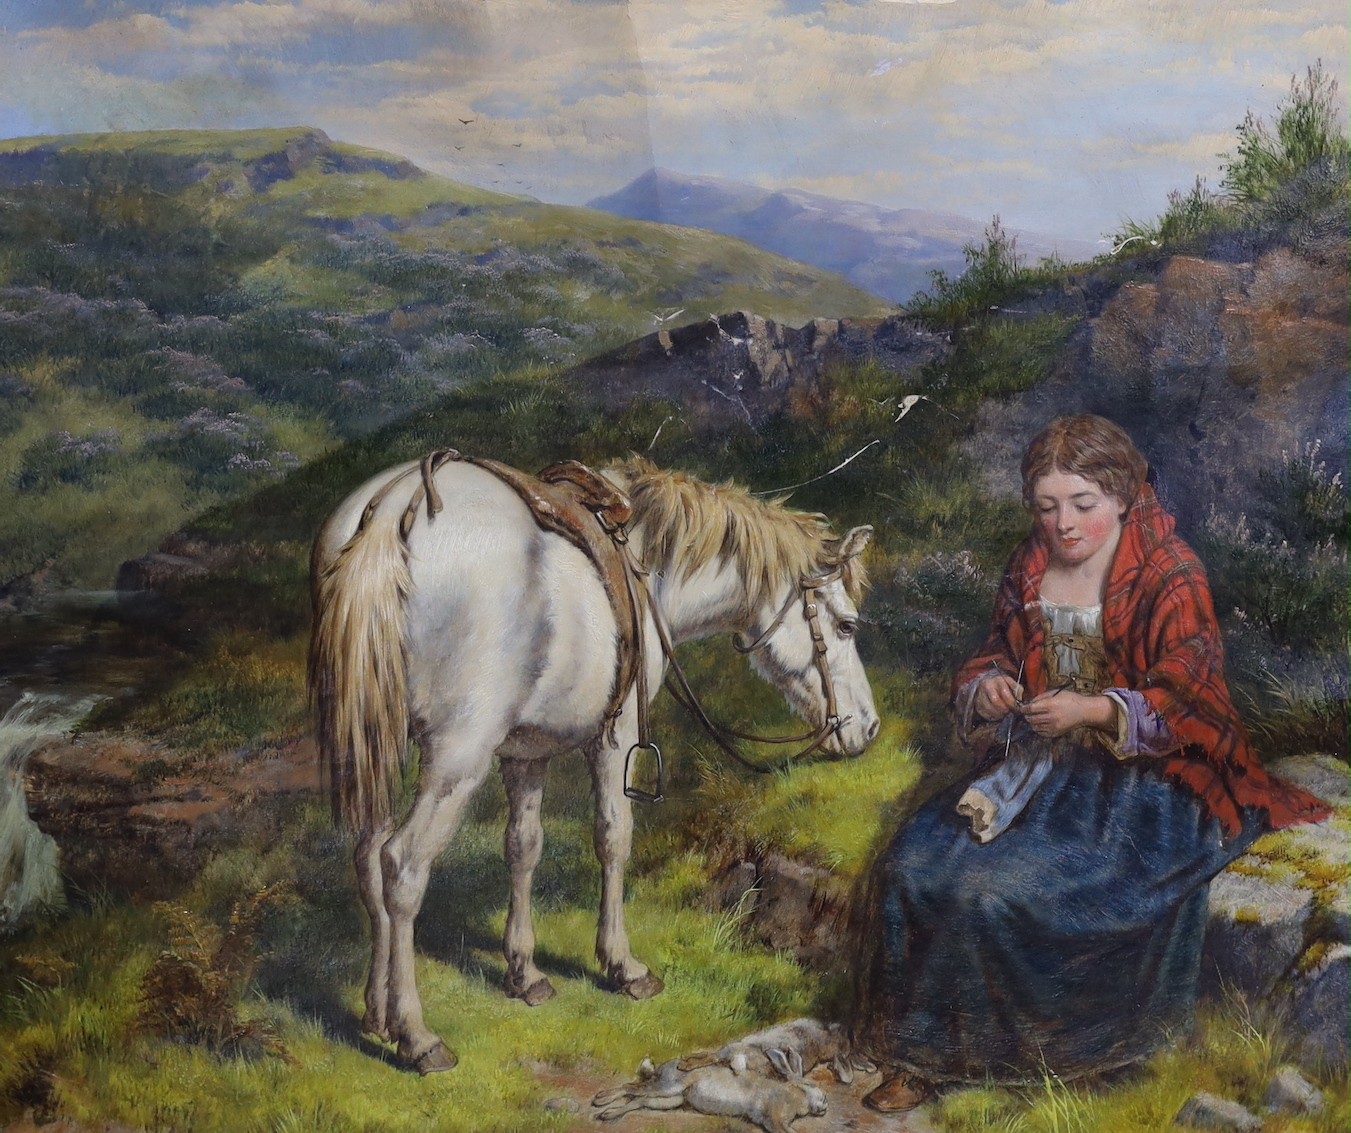 Isaac Henzell (1823-1875), oil on canvas, Woman and pony in the Highlands, signed and dated 1864, 50 x 60cm.